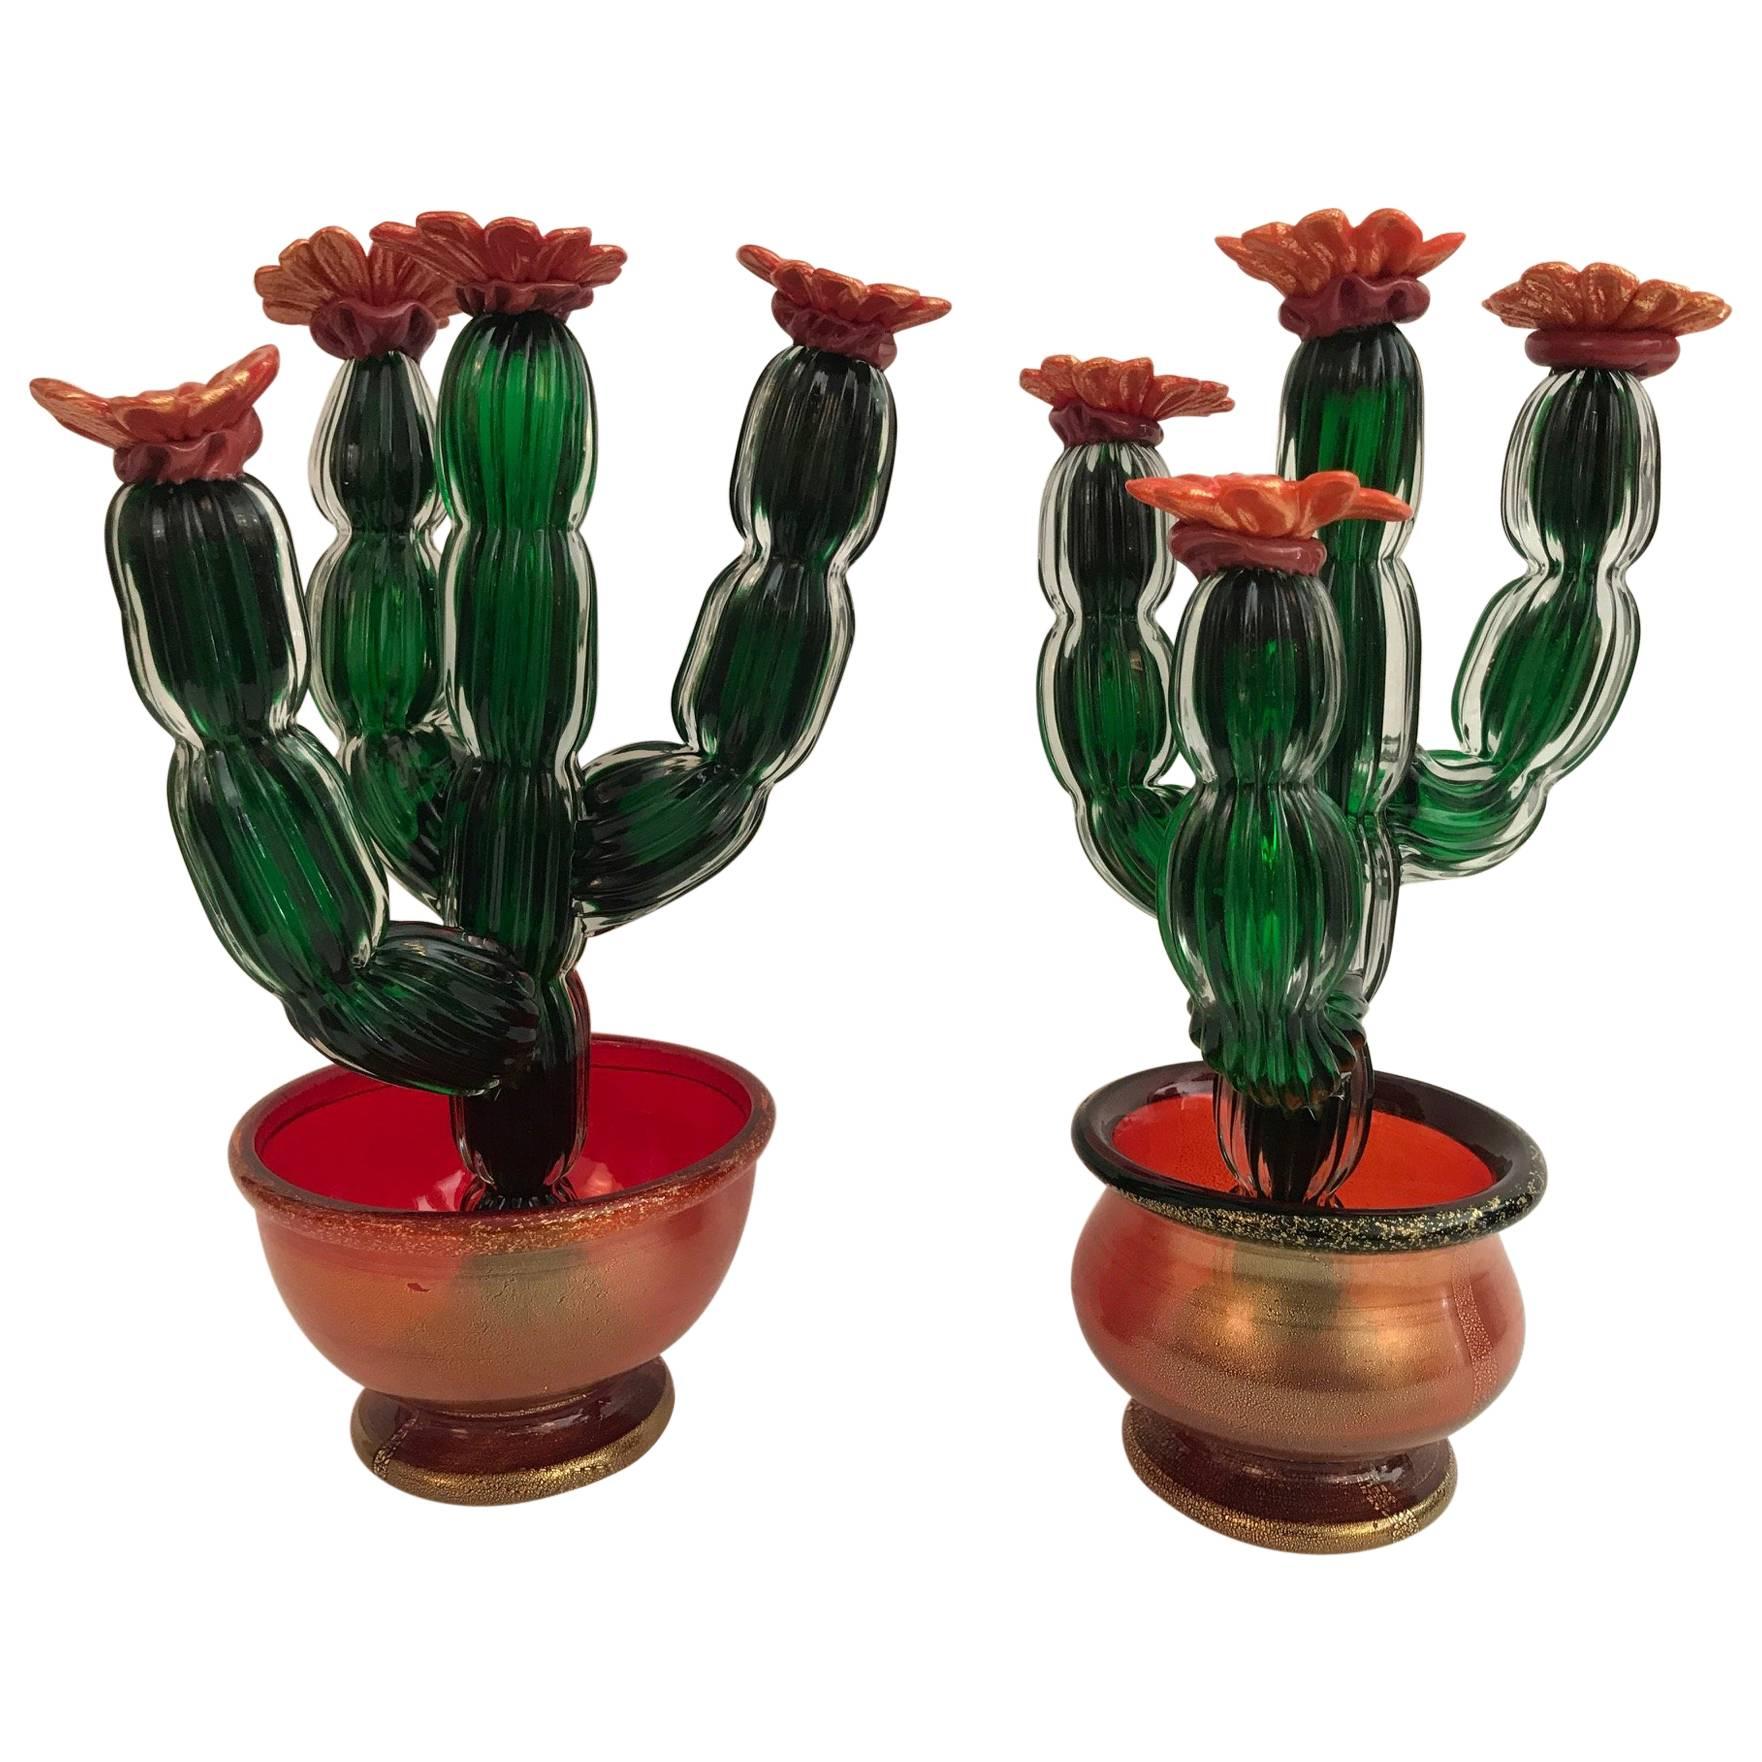 Two Murano Glass Cactus in Pots